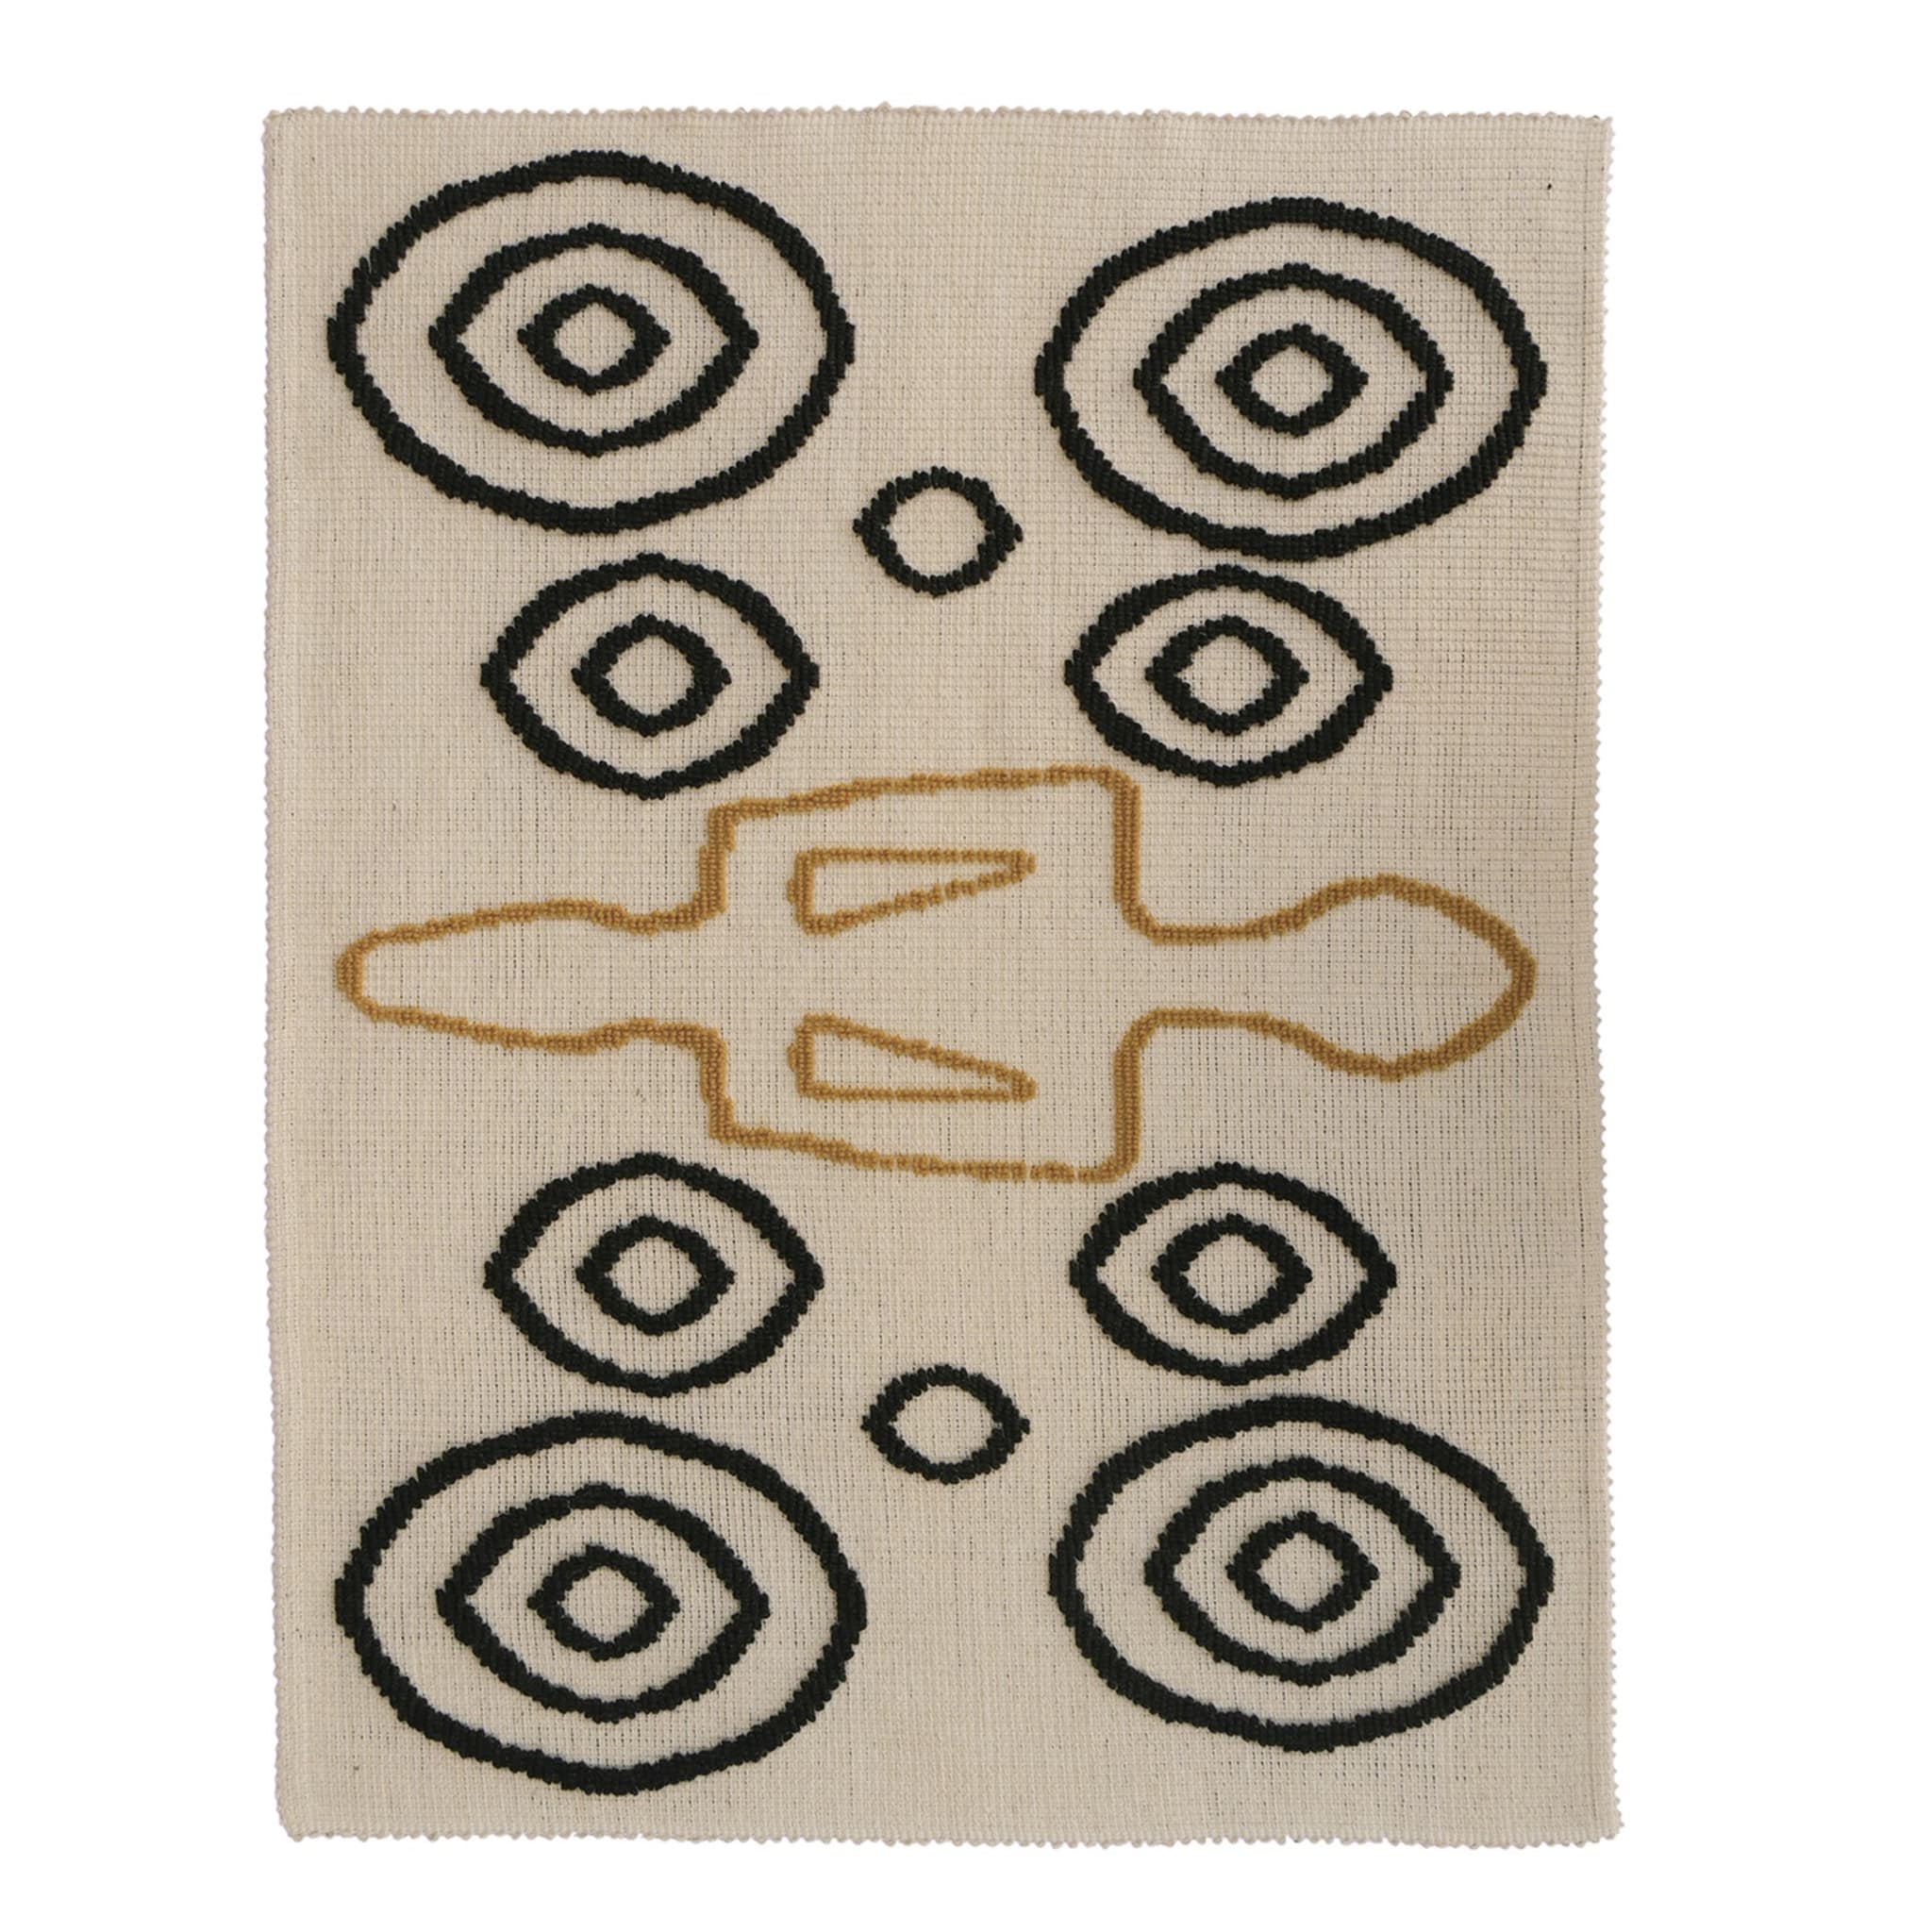 Dea Madre Beige Tapestry by Carlo Sanna - Main view